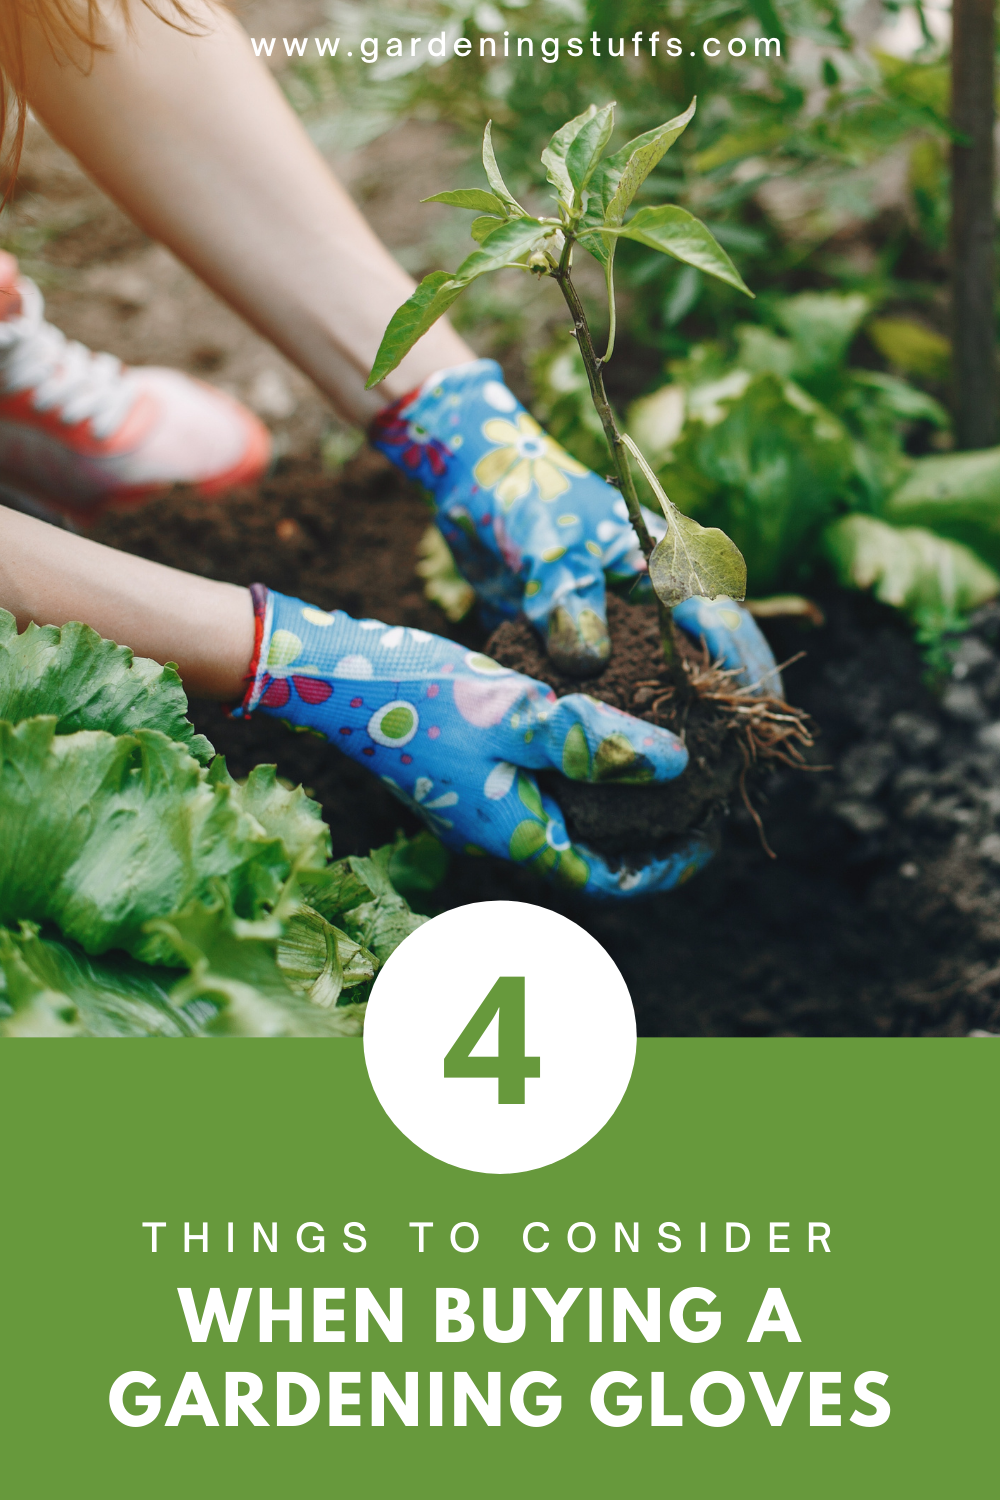 Getting a gardening glove from the market is easy, but selecting the best product is challenging and confusing. The buying guide in this article could help you overcome such issues, consider the factors mentioned in the buying guide and get a gardening glove and you will not regret it.